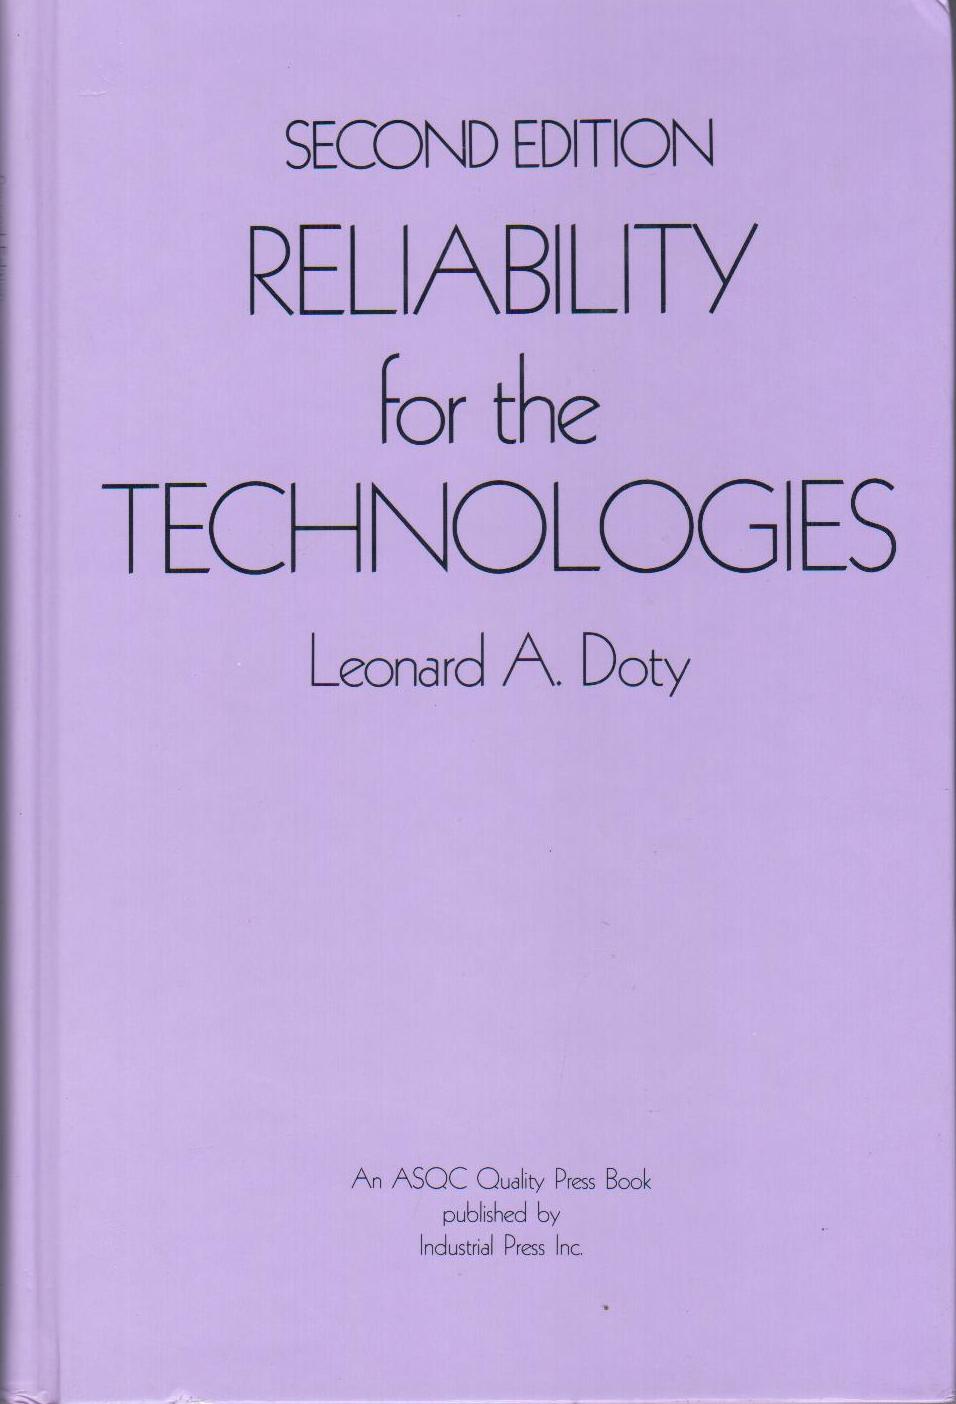 Reliability for the Technologies, 2nd Edition, Leonard A. Doty, 0831130245, 9780831130244